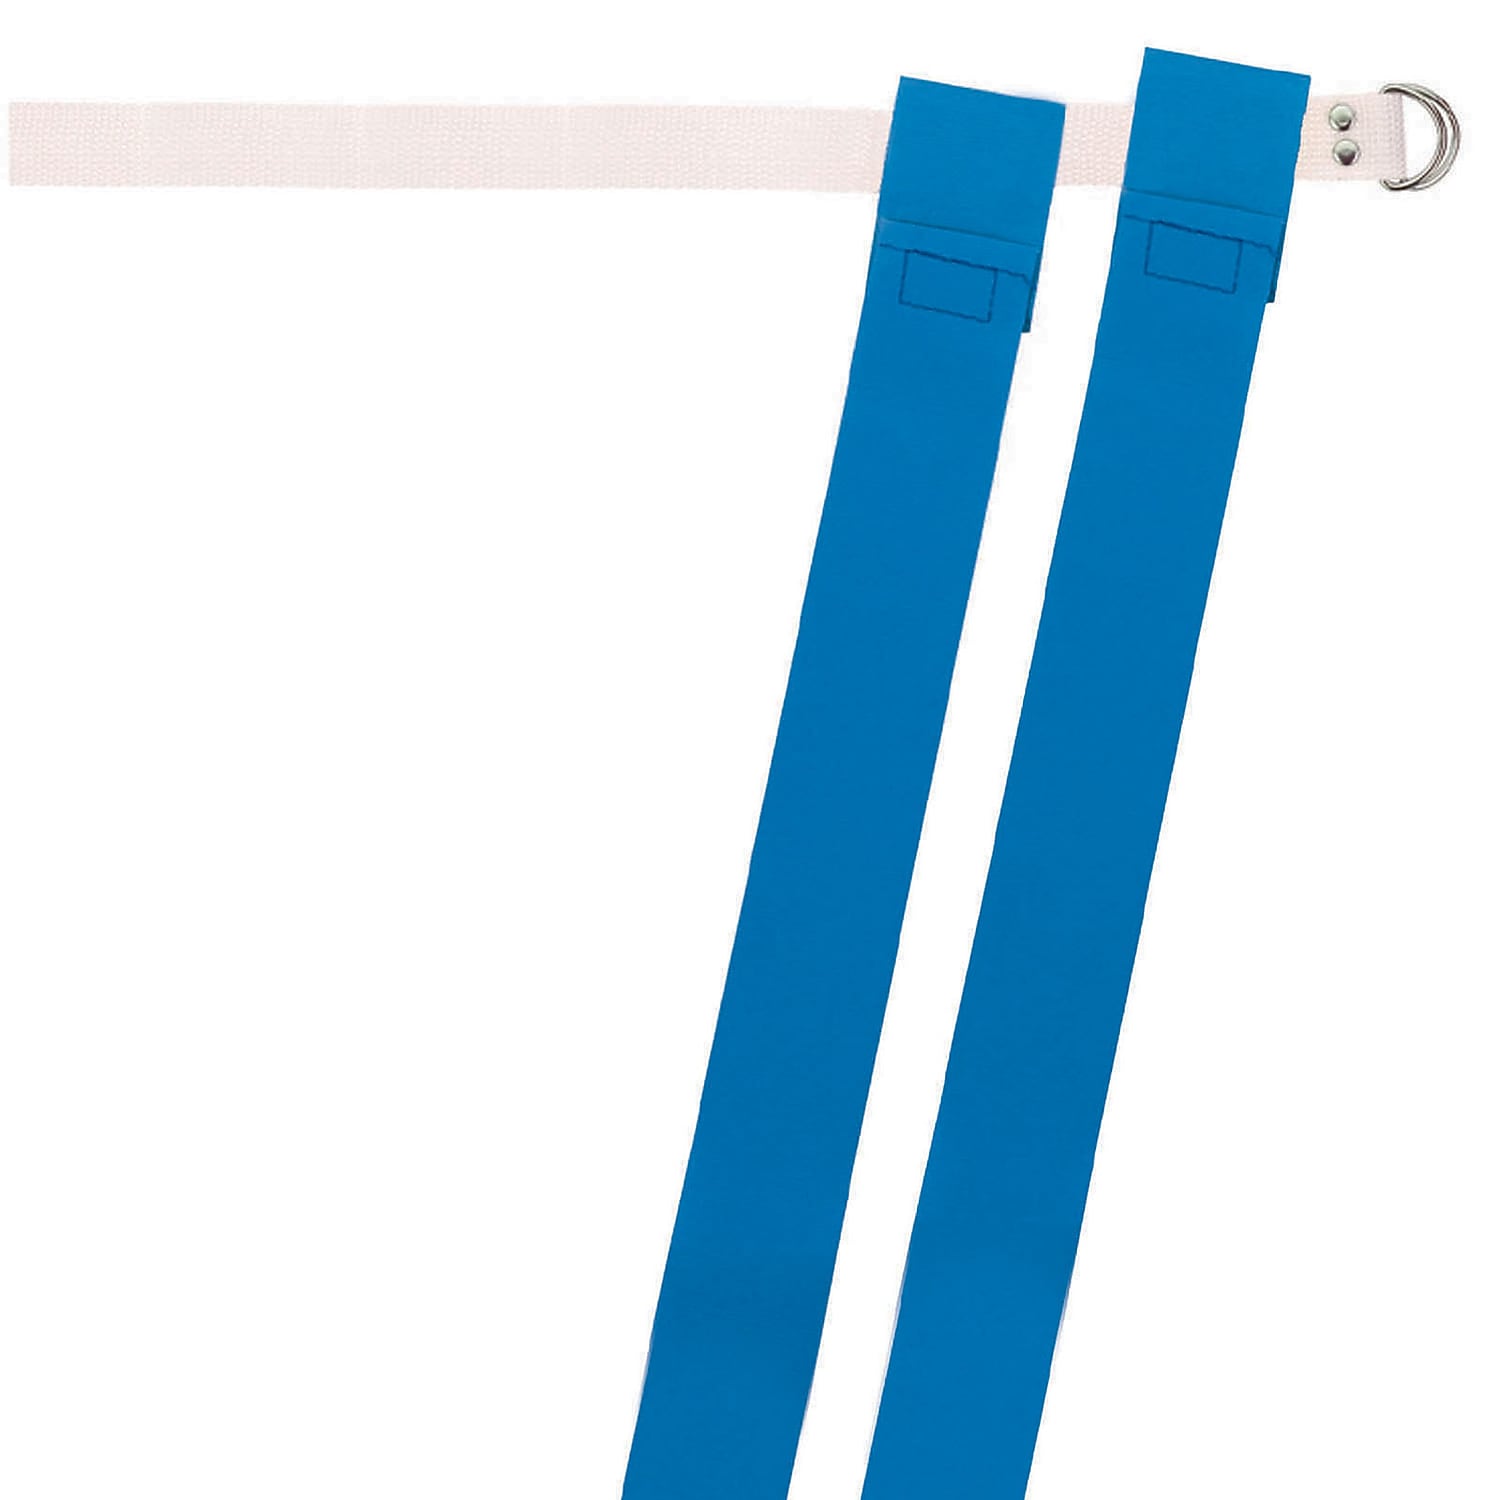 Dick Martin Sports Flag Football Belts Blue Pack of 12 (MASFFS112BL) - image 1 of 2